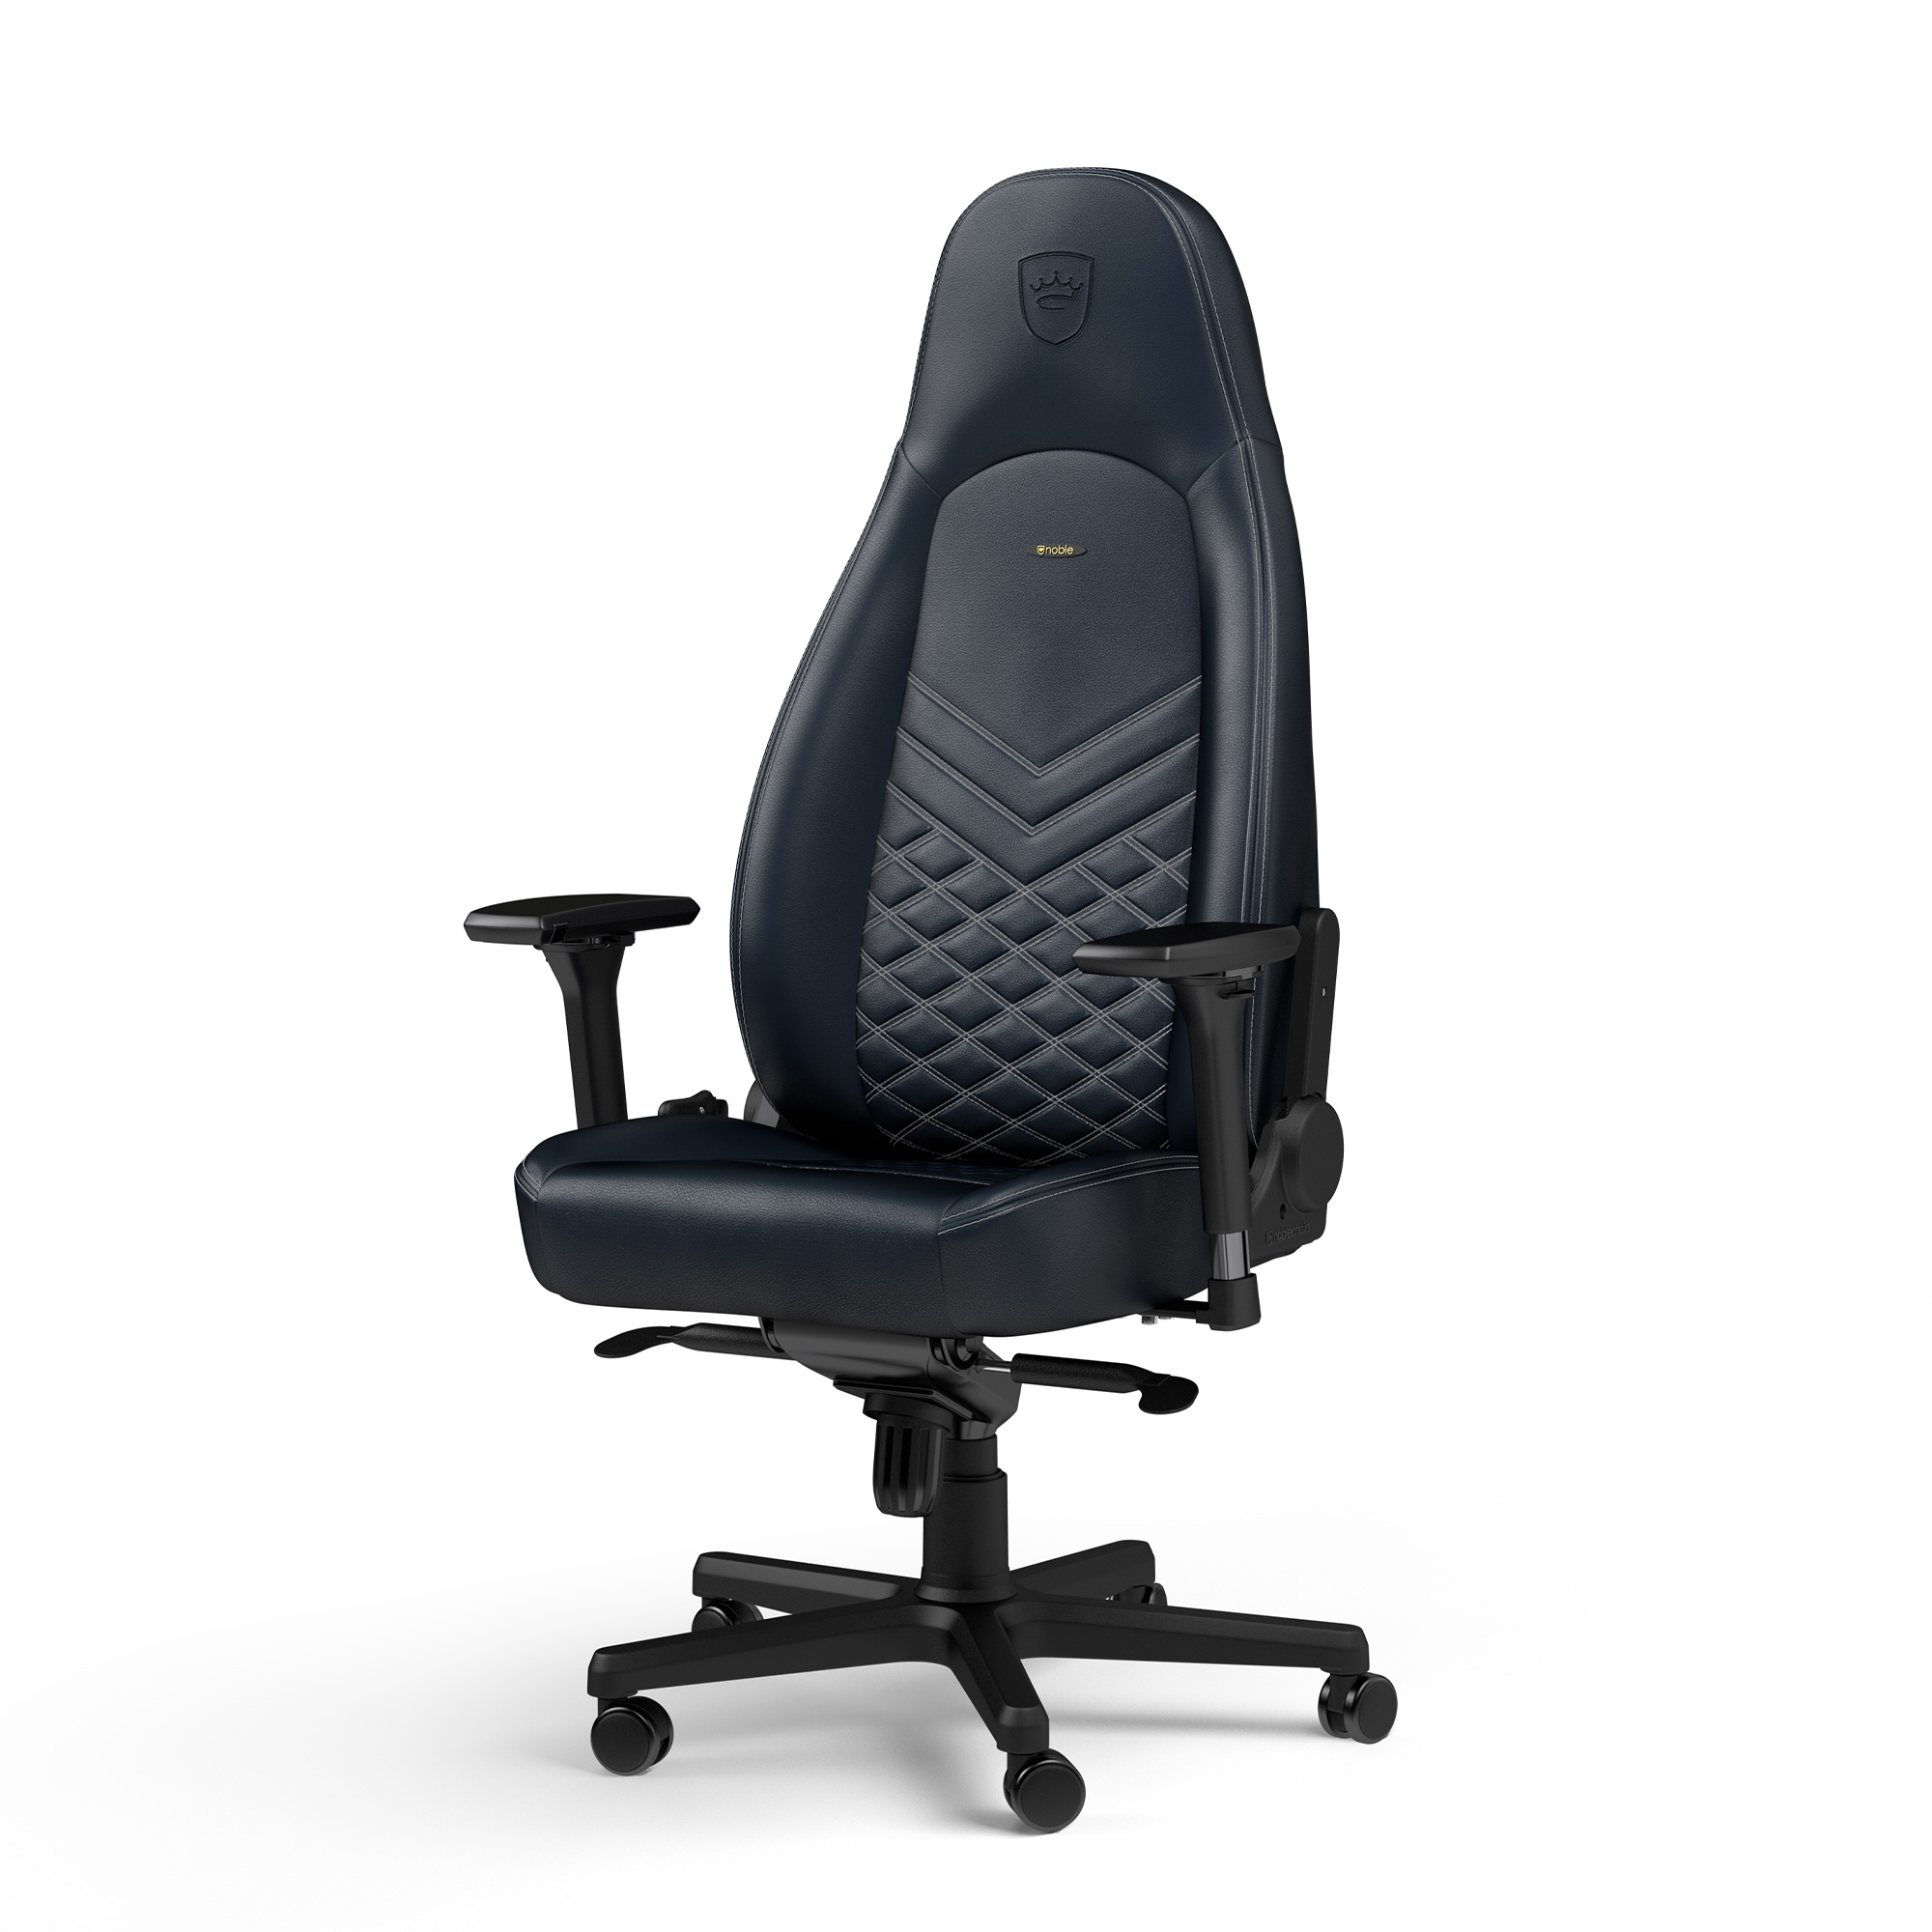 noblechairs - noblechairs ICON Top Grain Leather Gaming Chair - Midnight Blue/Graphite